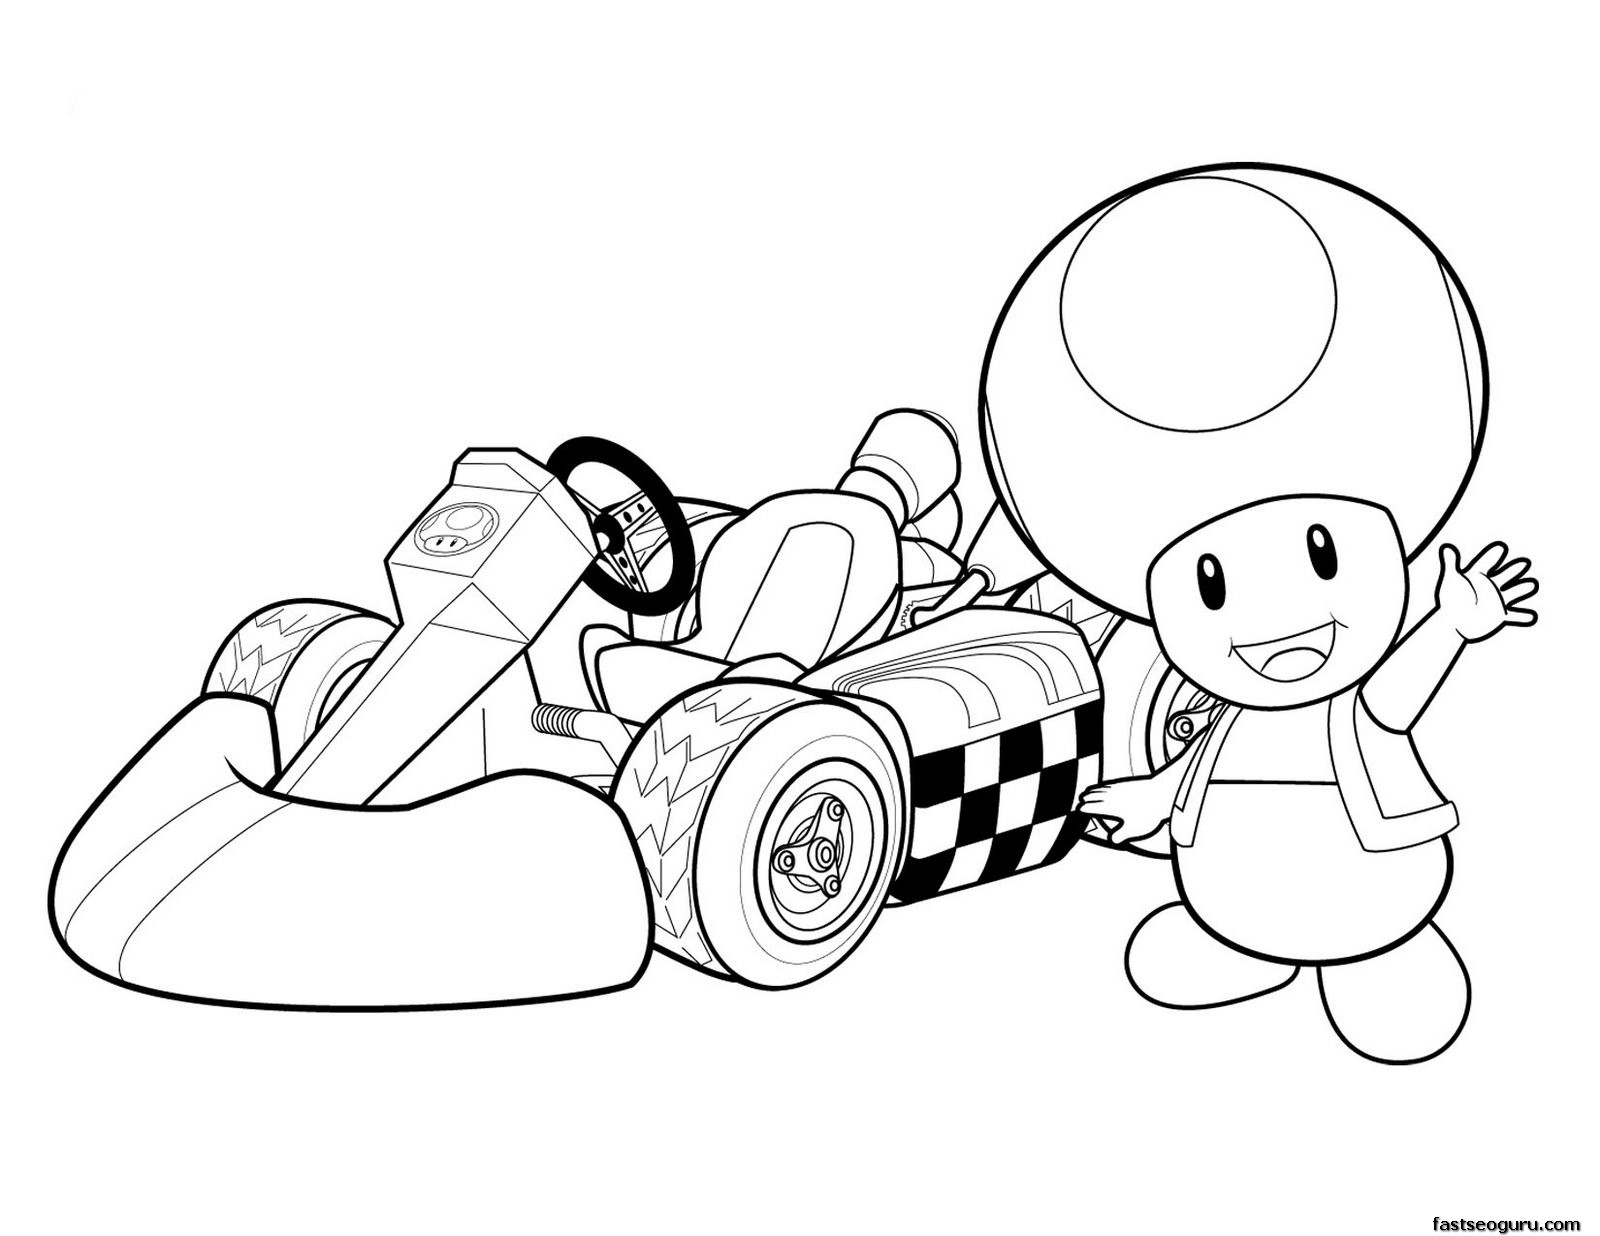 Homepage » Cartoon » Print out Super mario and Toad coloring pages